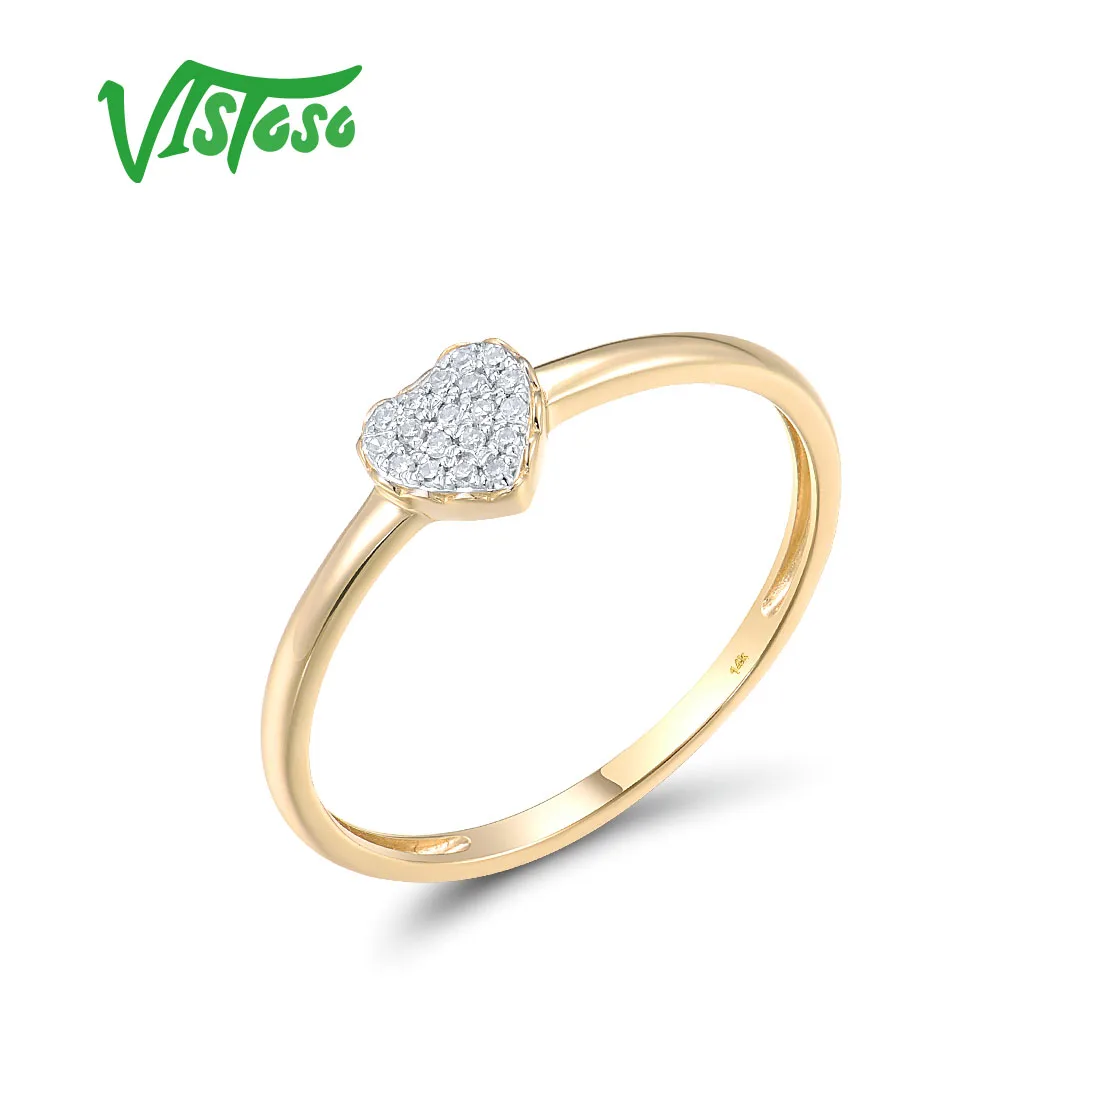 VISTOSO Genuine 14K 585 Yellow Gold Ring For Women Sparkling Natural Diamonds Sweet Heart Shaped Ring Fashion Fine Chic Jewelry